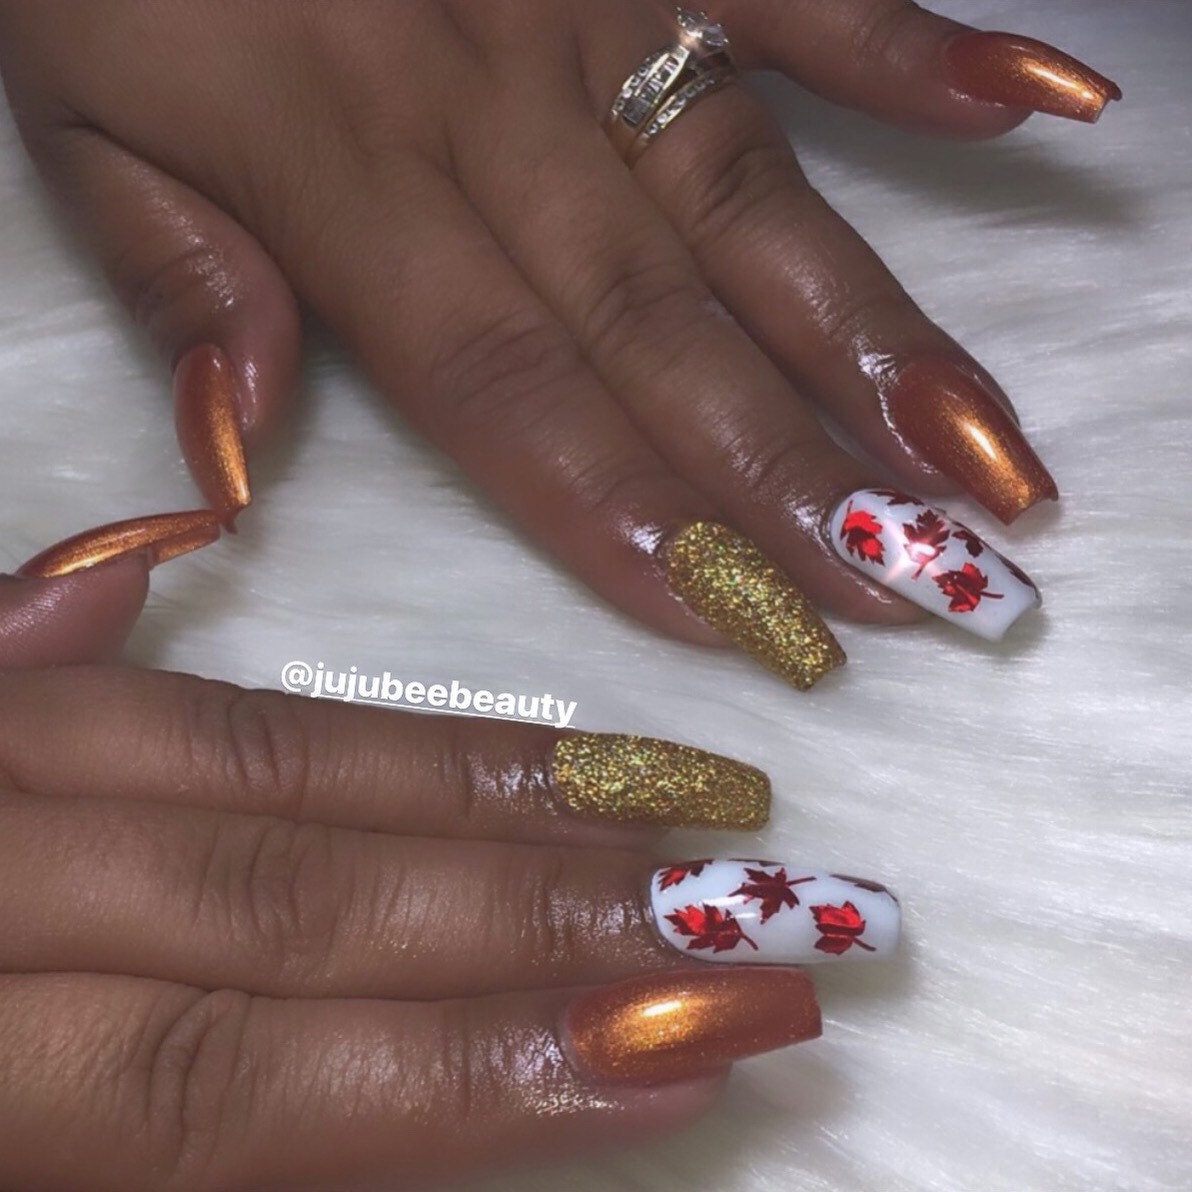 Fall Leaves Nail Art Sticker Orange Holographic Nail Decal | Etsy